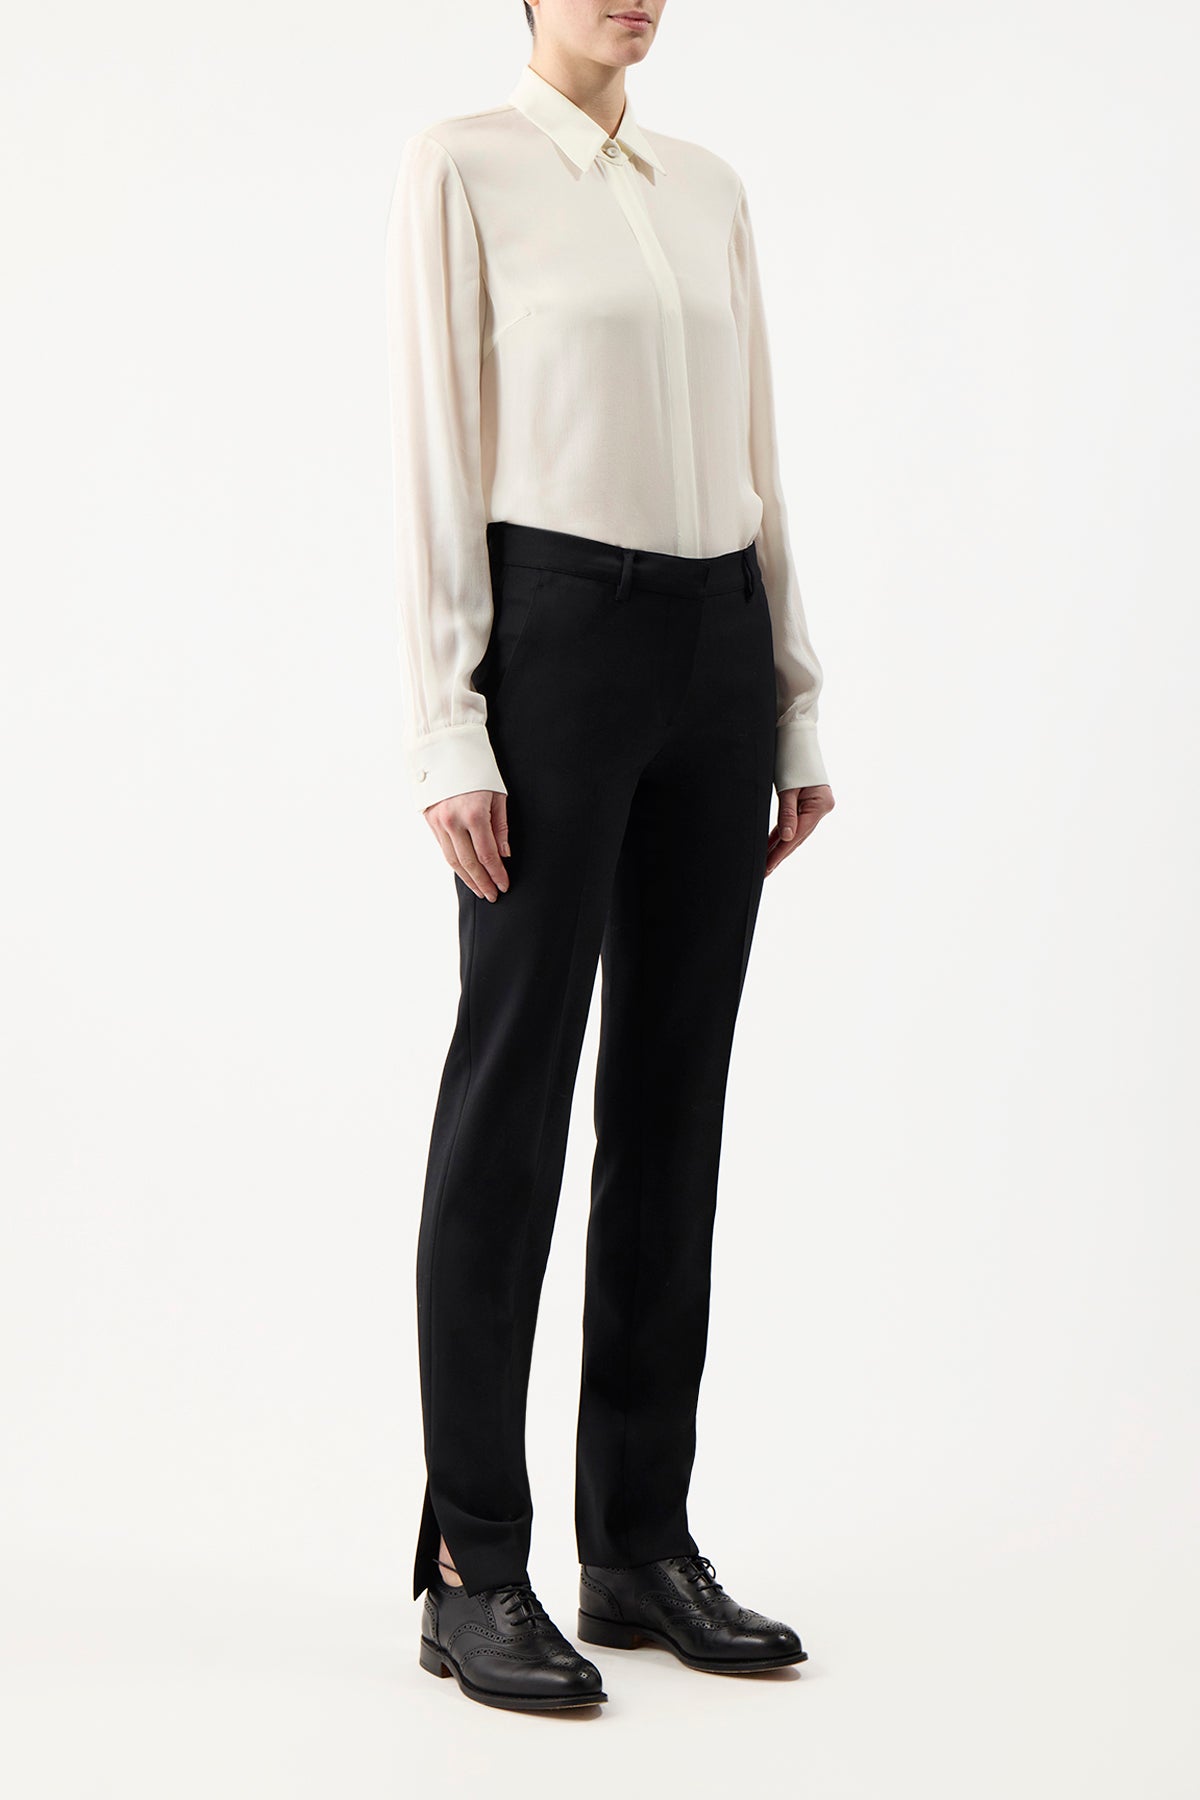 Henri Blouse in Ivory Silk Cashmere